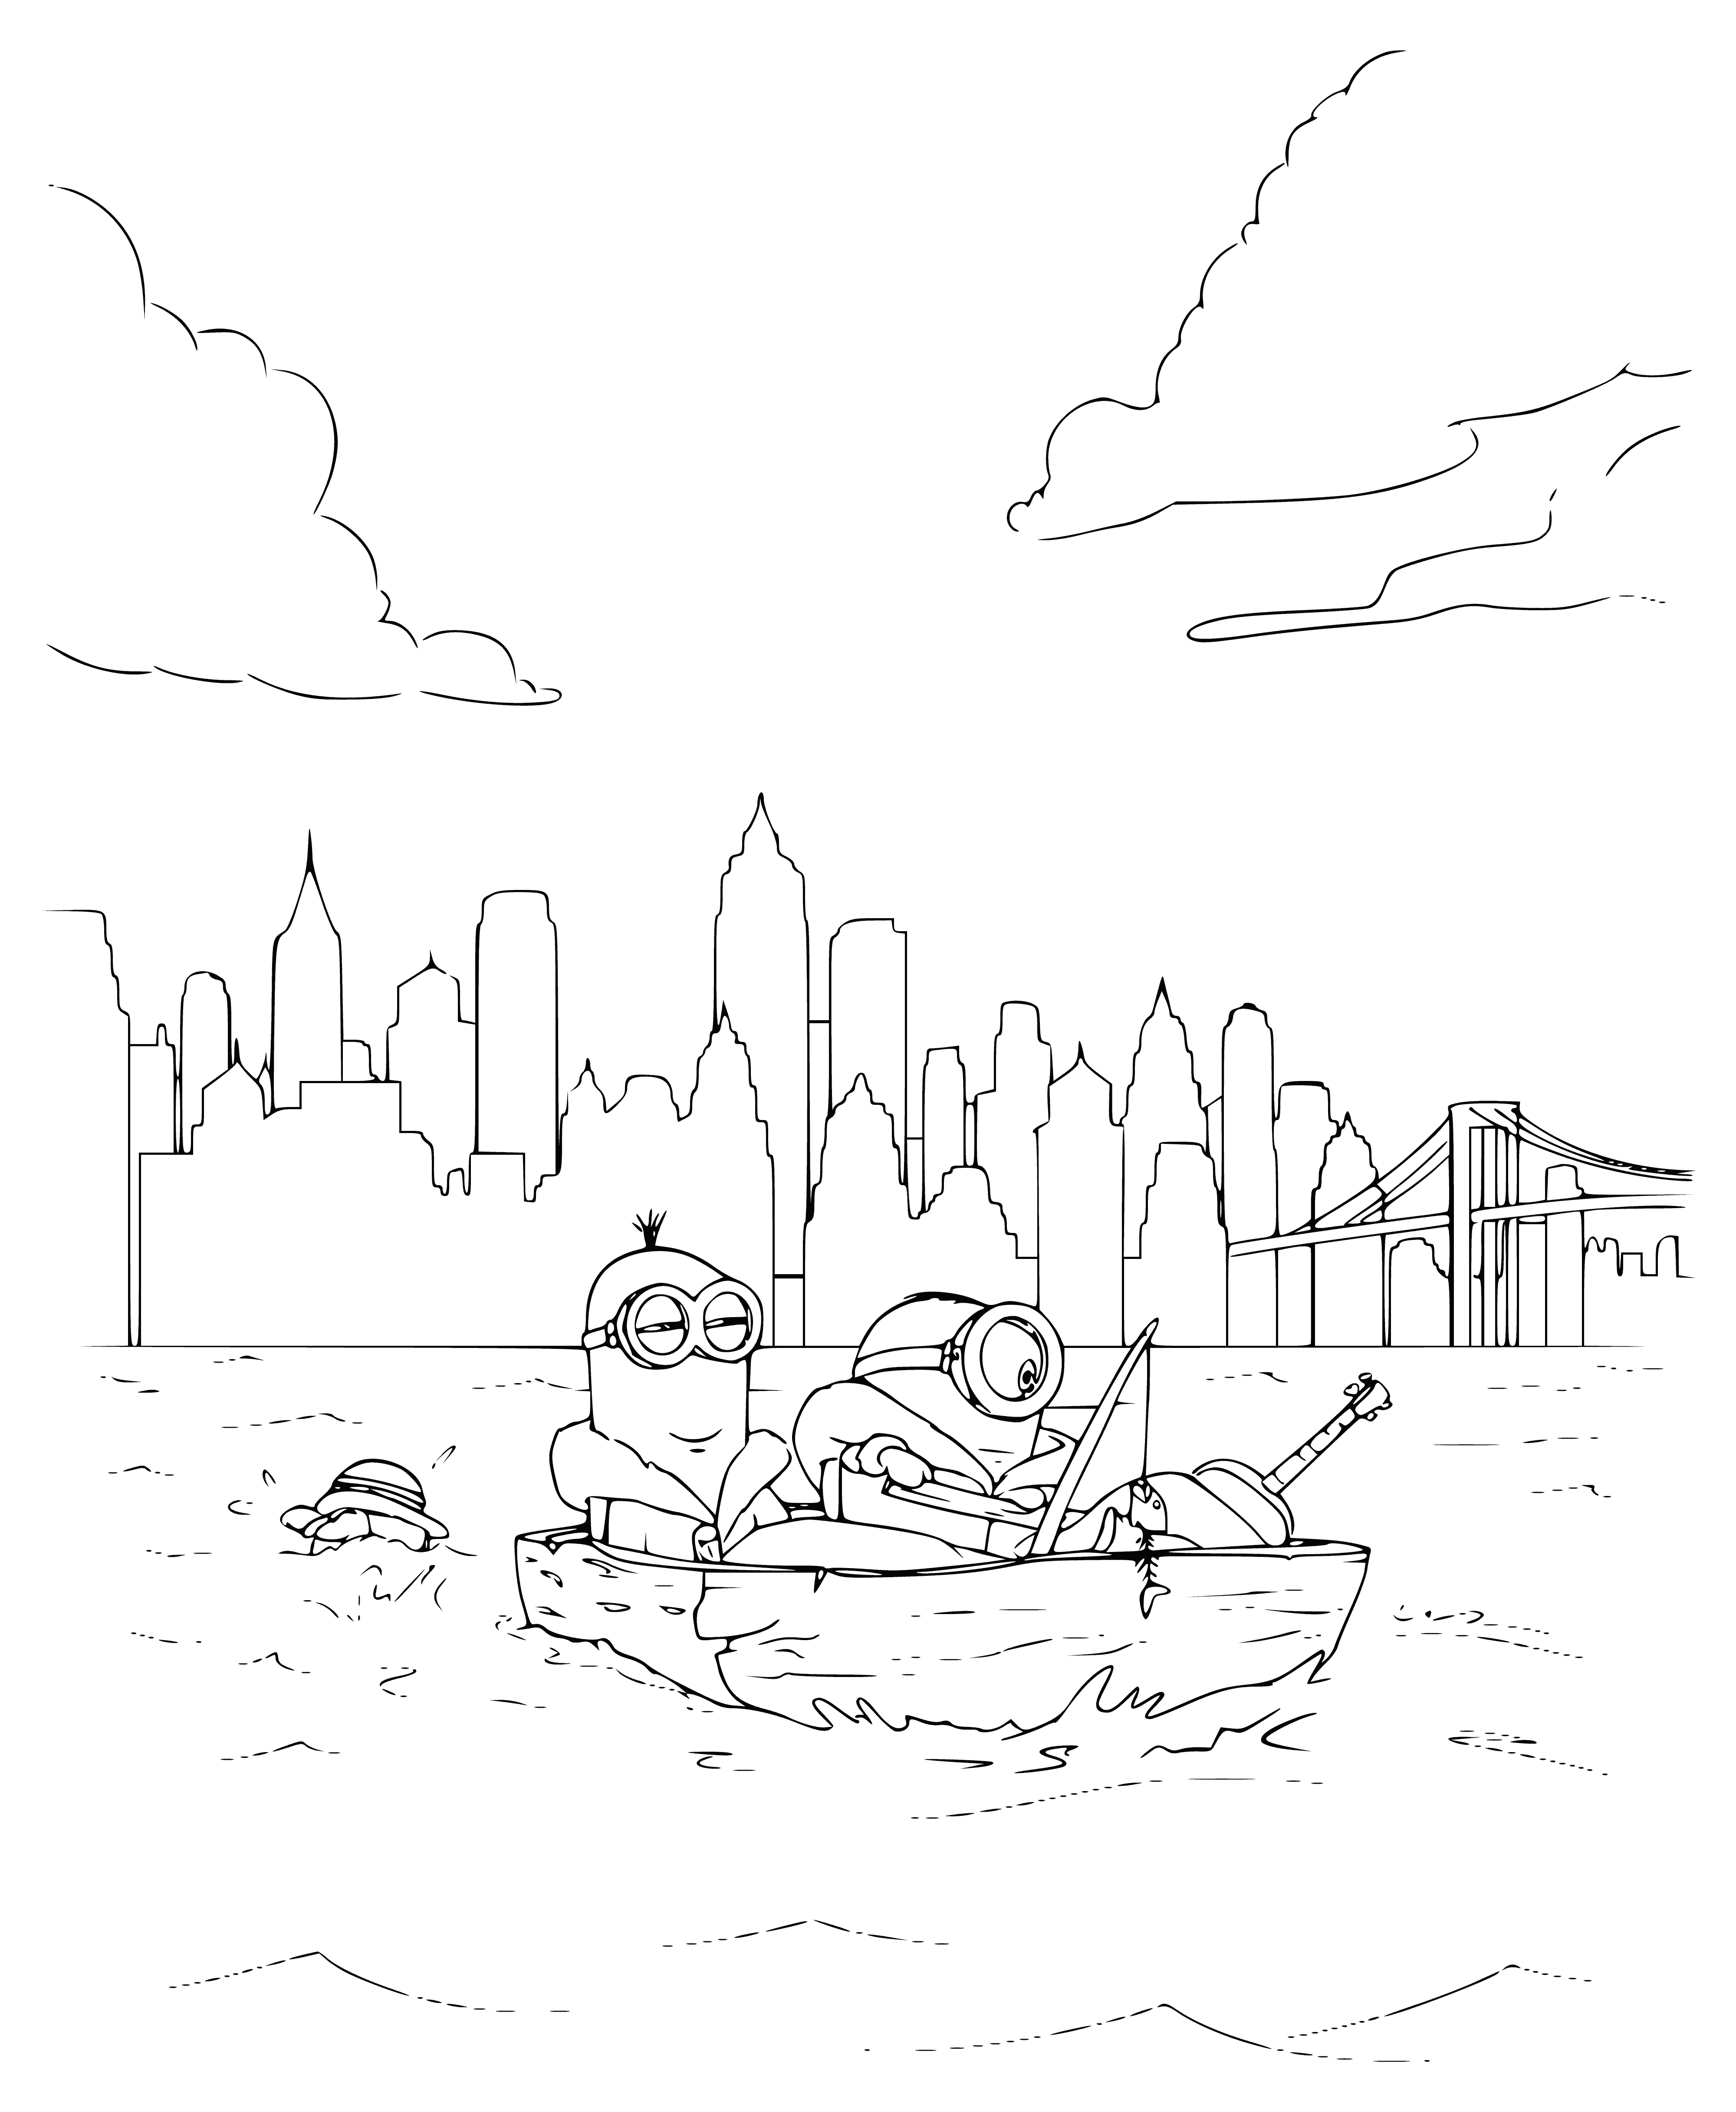 coloring page: 3 minions fishing in a stream - 1 standing on a rock, 2 sitting on the bank w/ rods & fish.